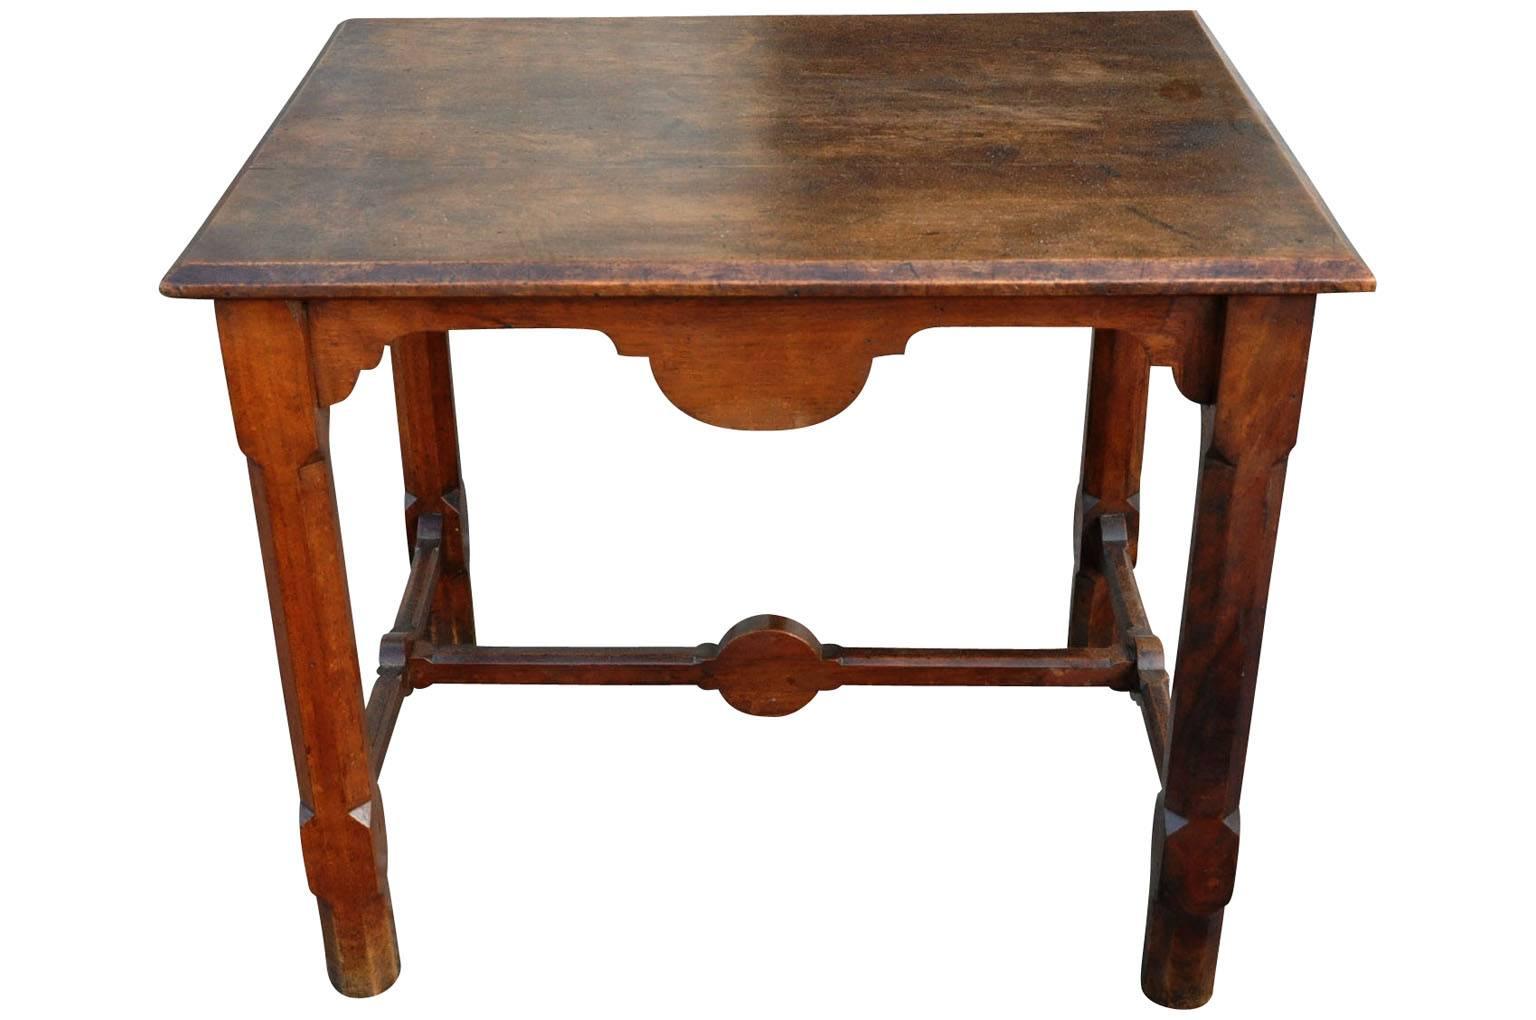 A delightful later 19th century cocktail table, side table from Portugal. Beautifully constructed from handsome walnut. Wonderful patina.